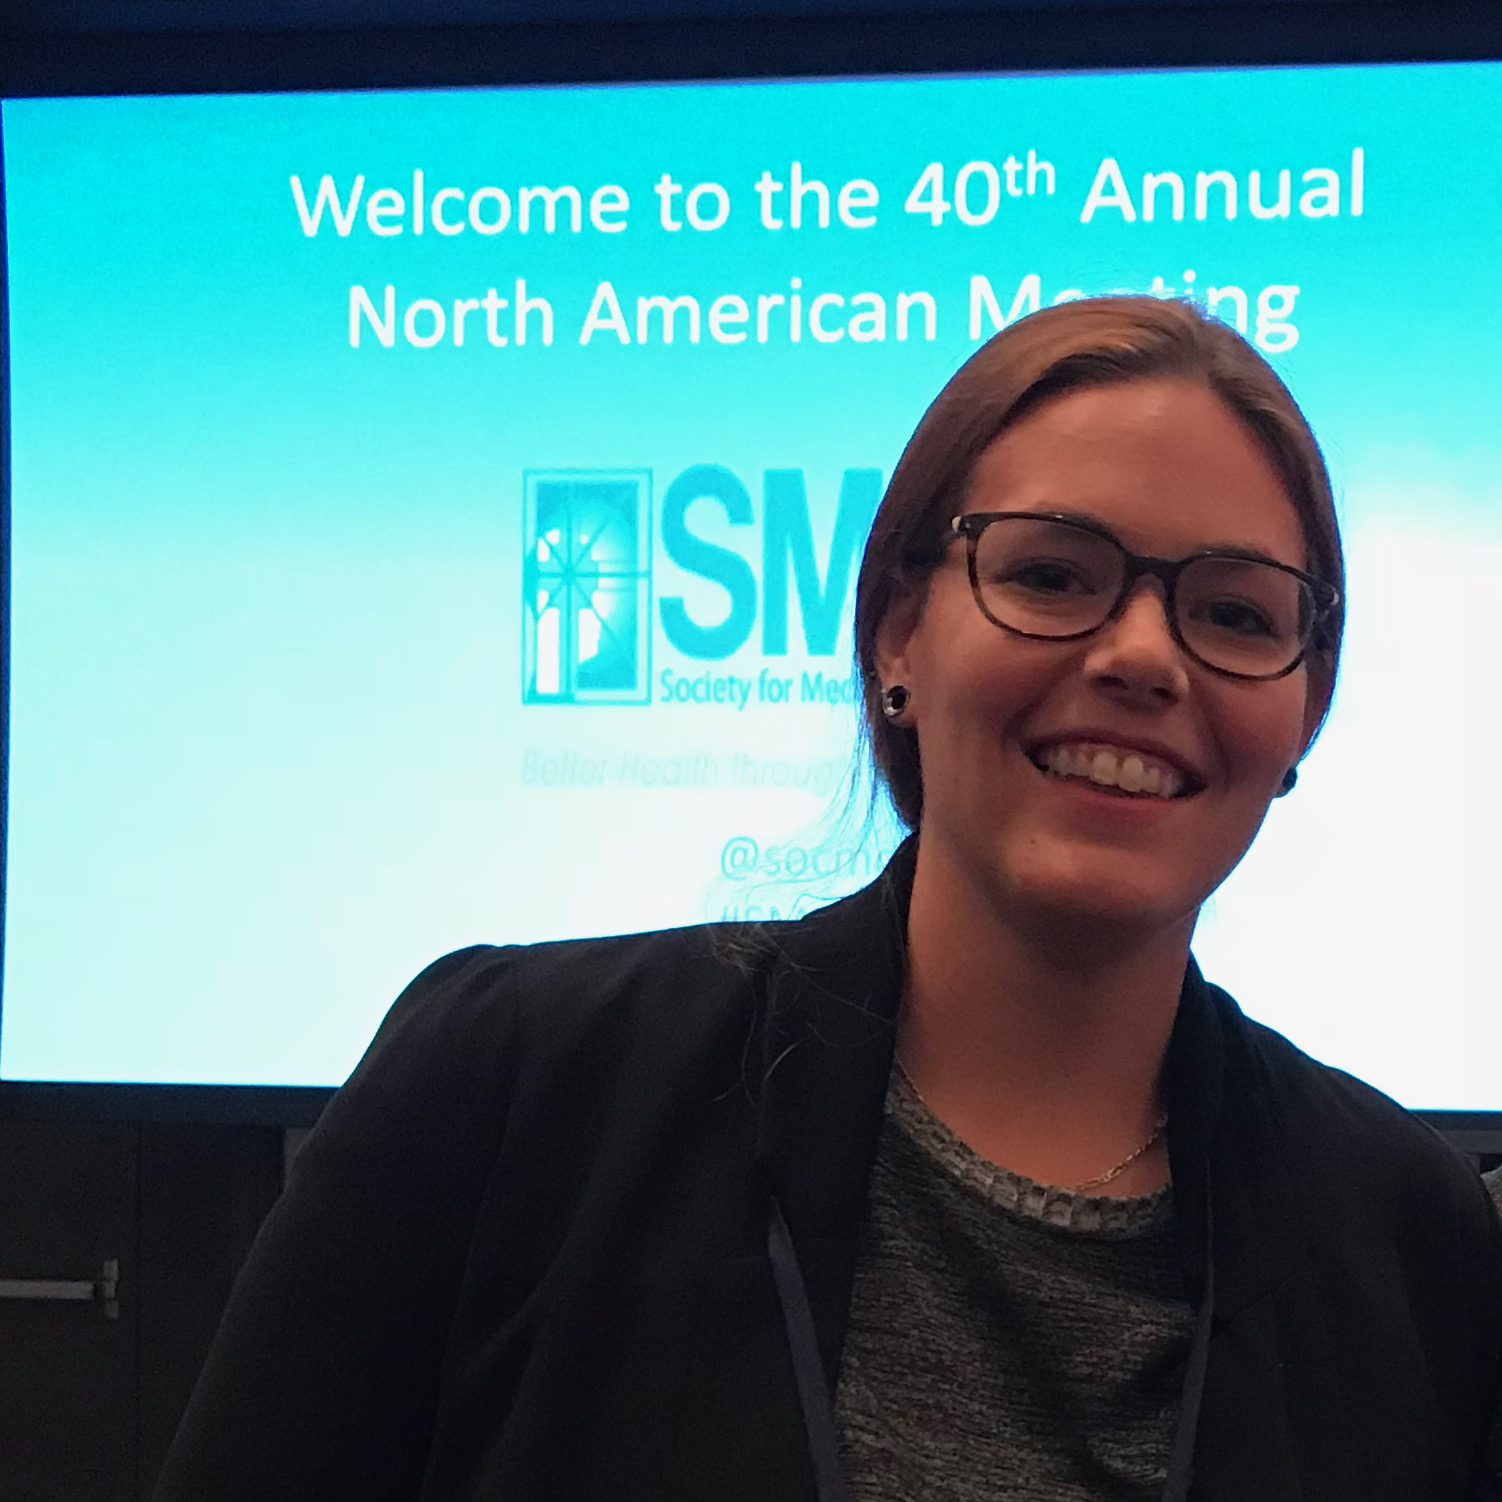 A smiling white woman in front of a conference screen